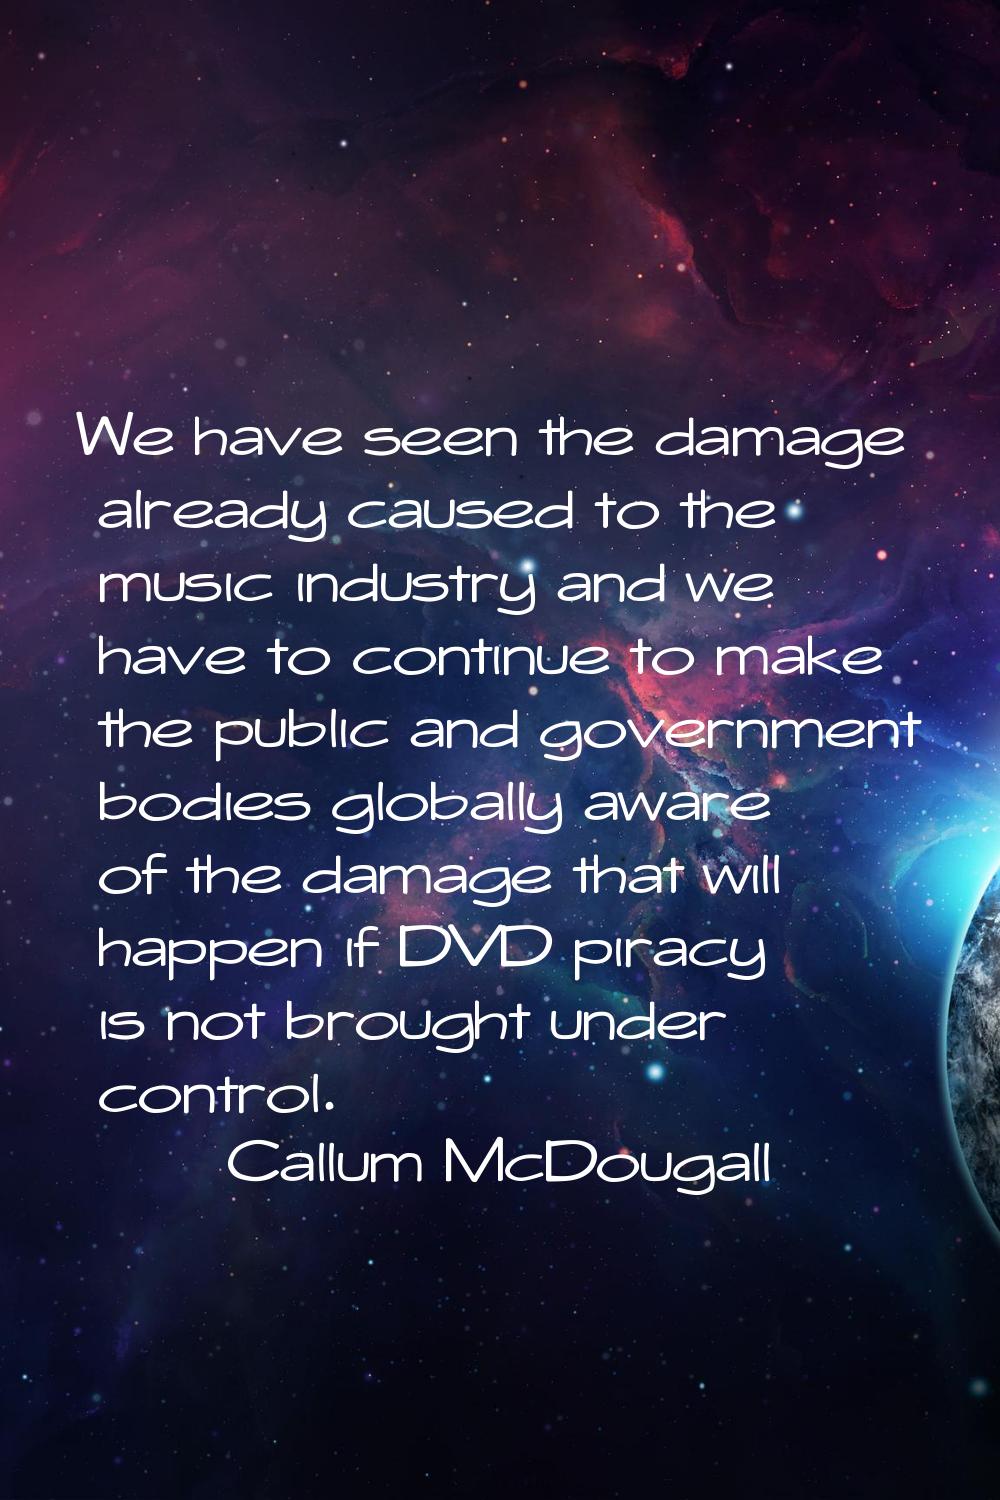 We have seen the damage already caused to the music industry and we have to continue to make the pu